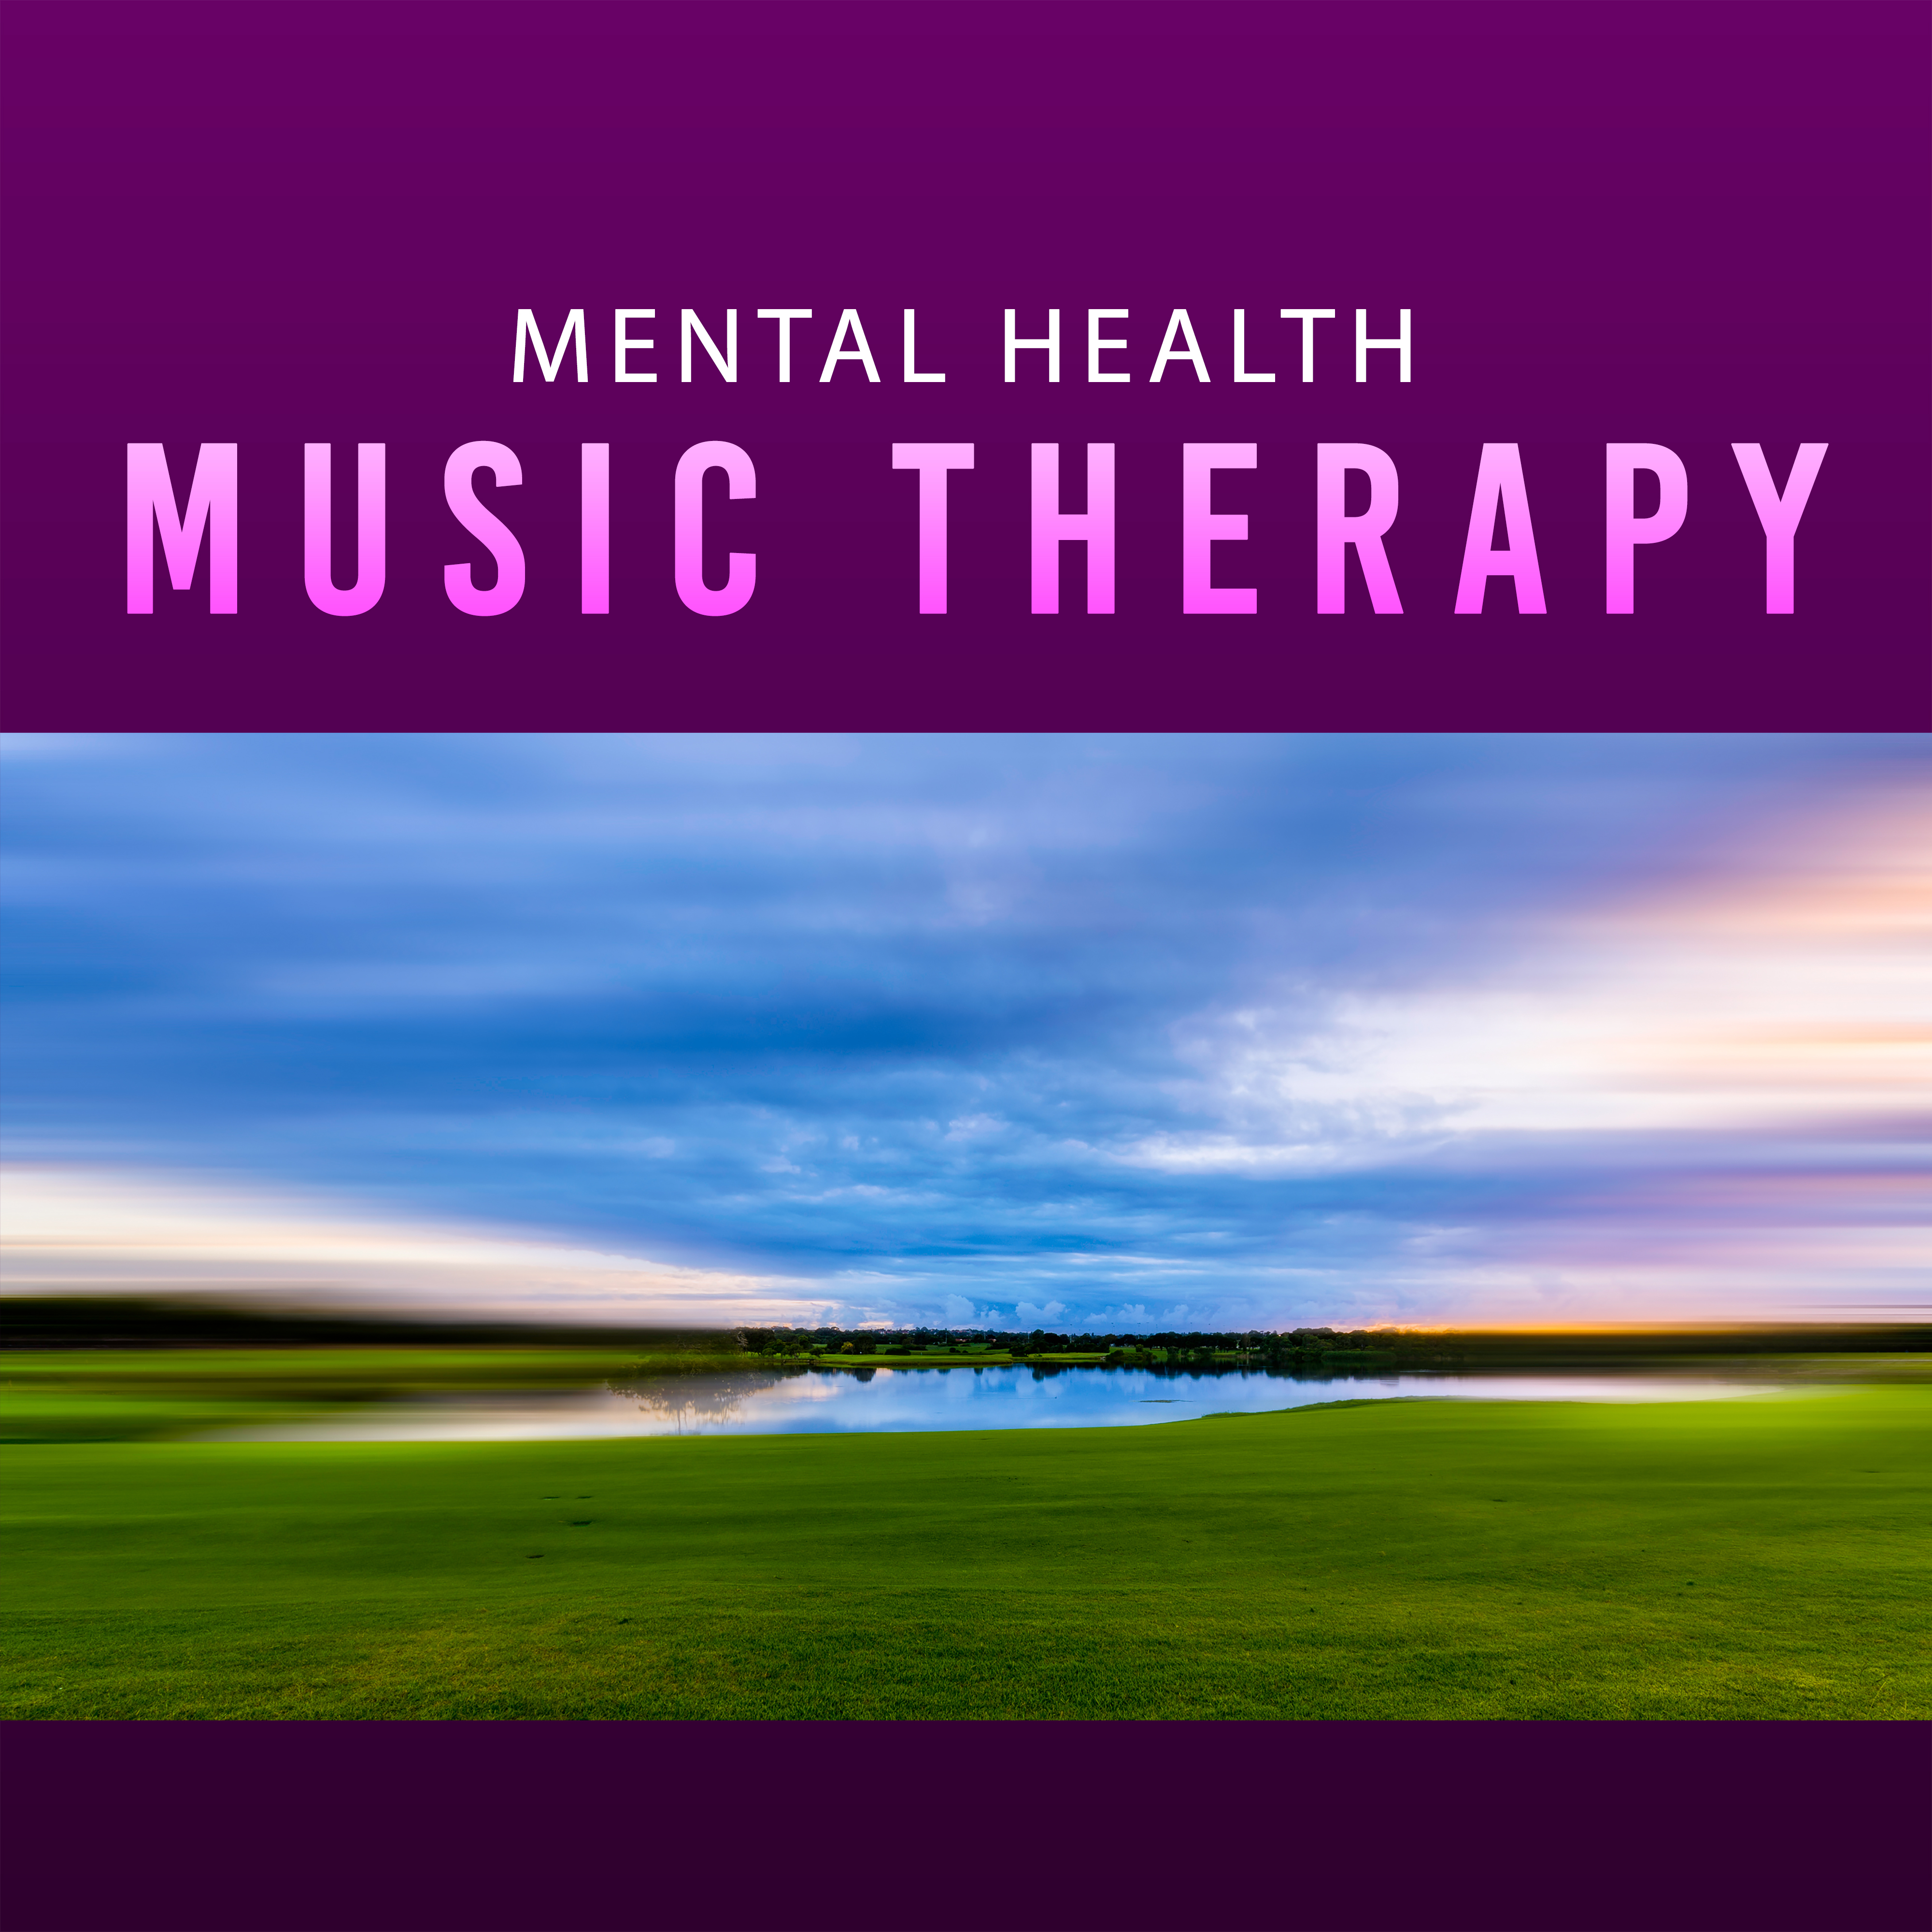 Mental Health Music Therapy – Peaceful Nature Sounds, Relaxing Music, Stress Relief, Finest Selected New Age